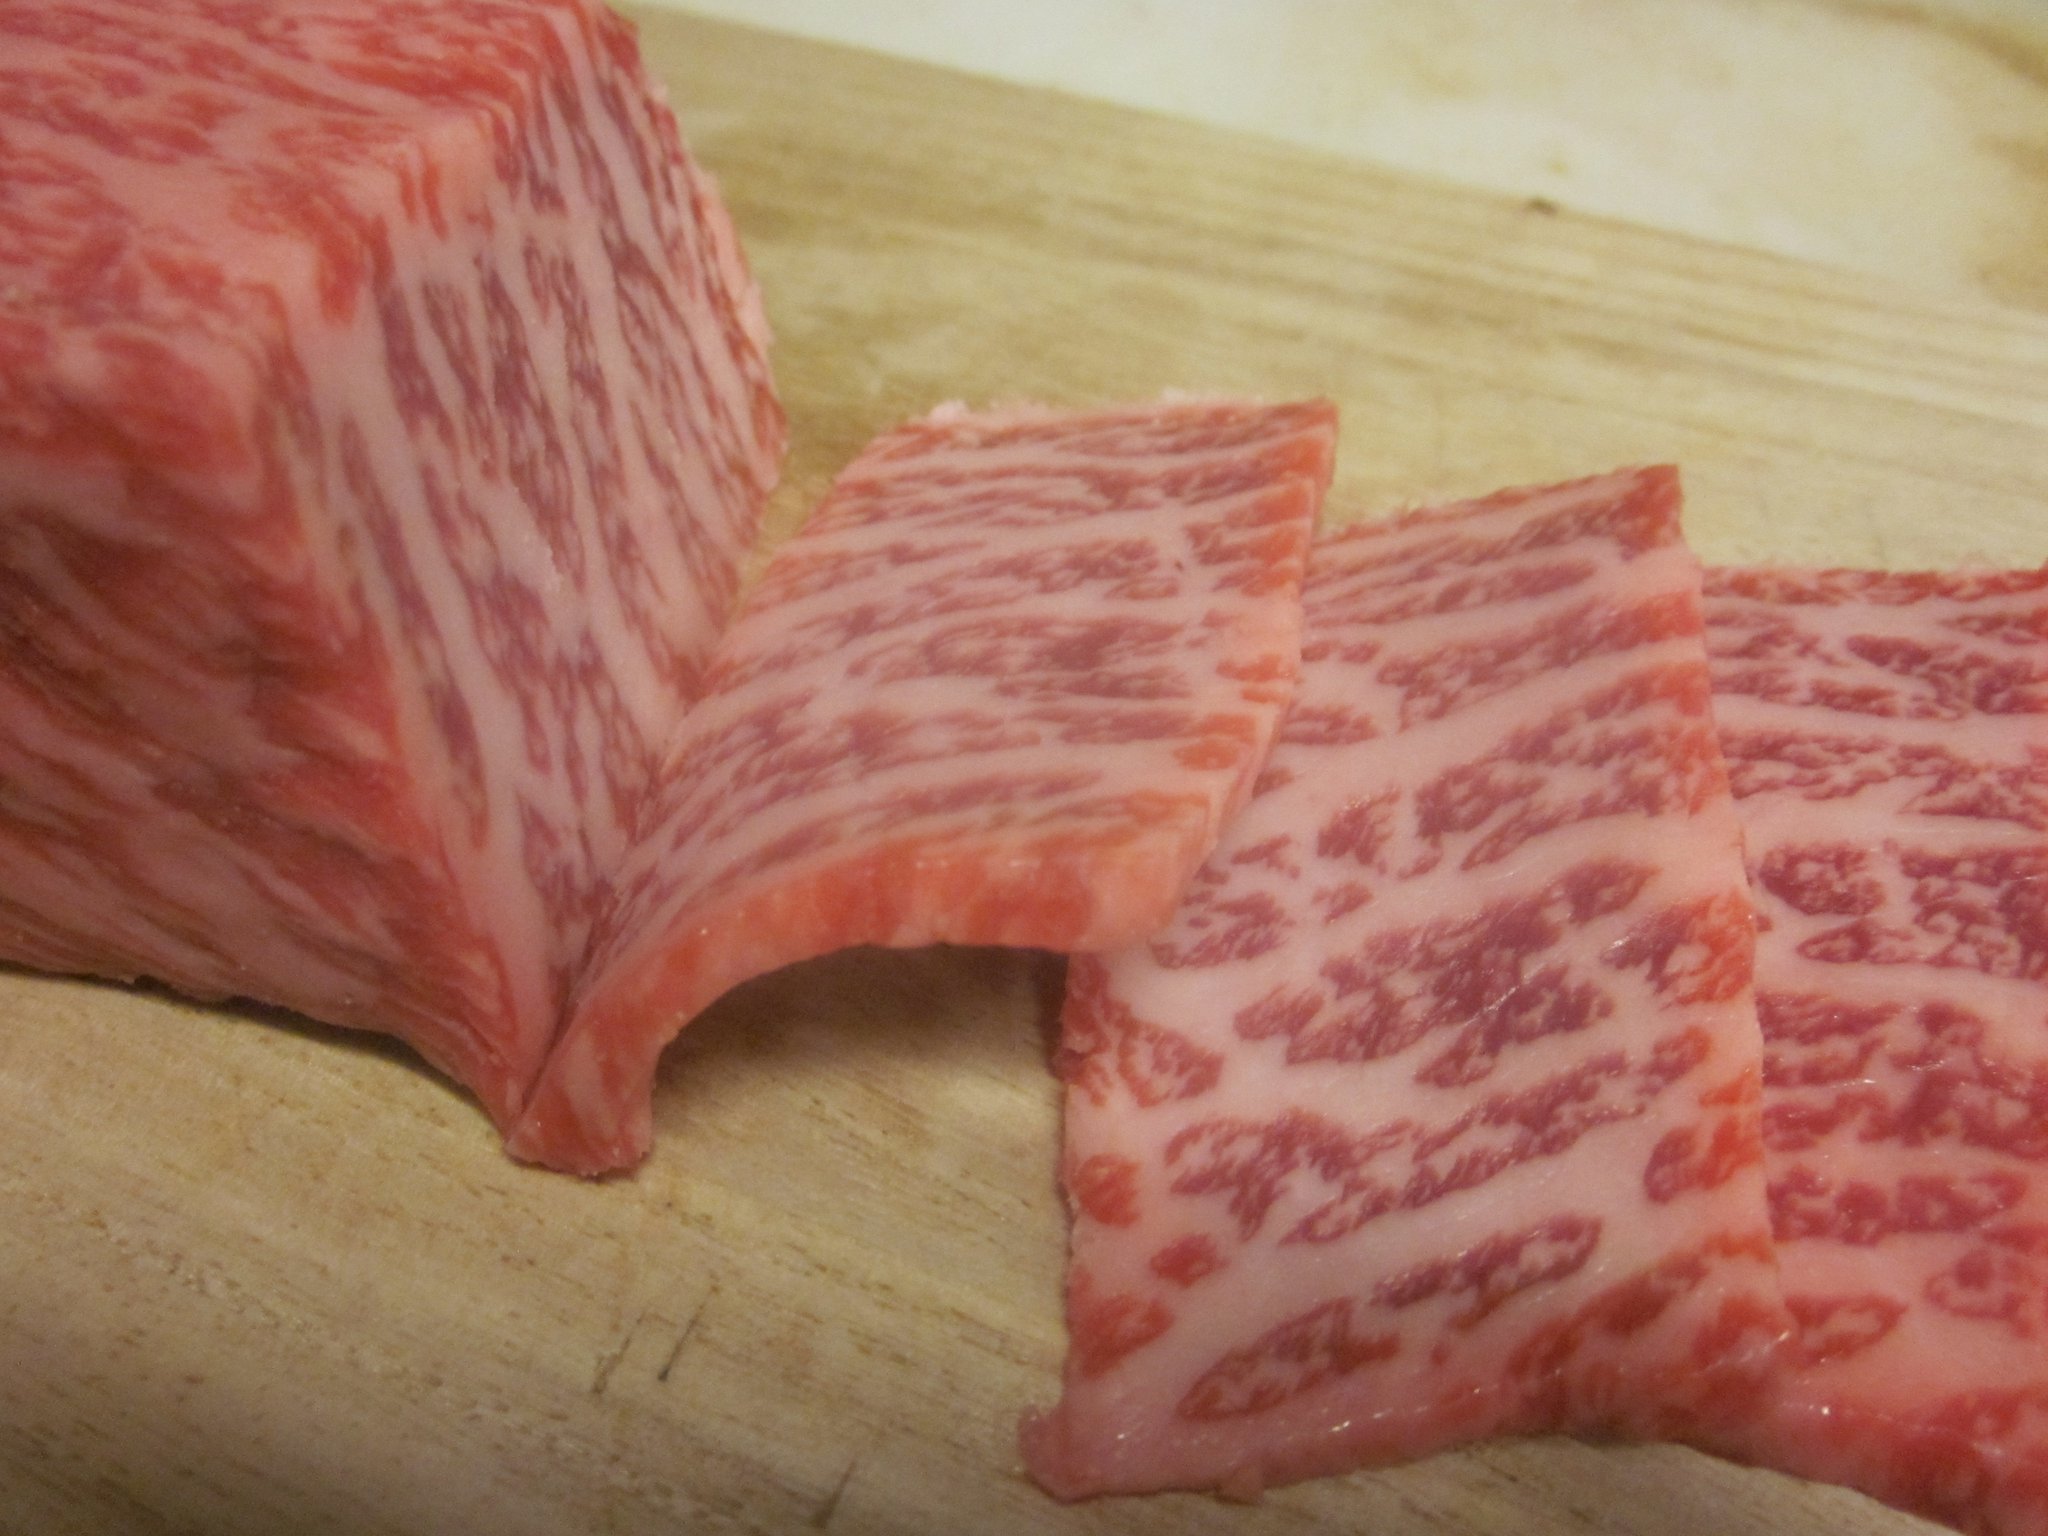 Explanations of WAGYU cuts